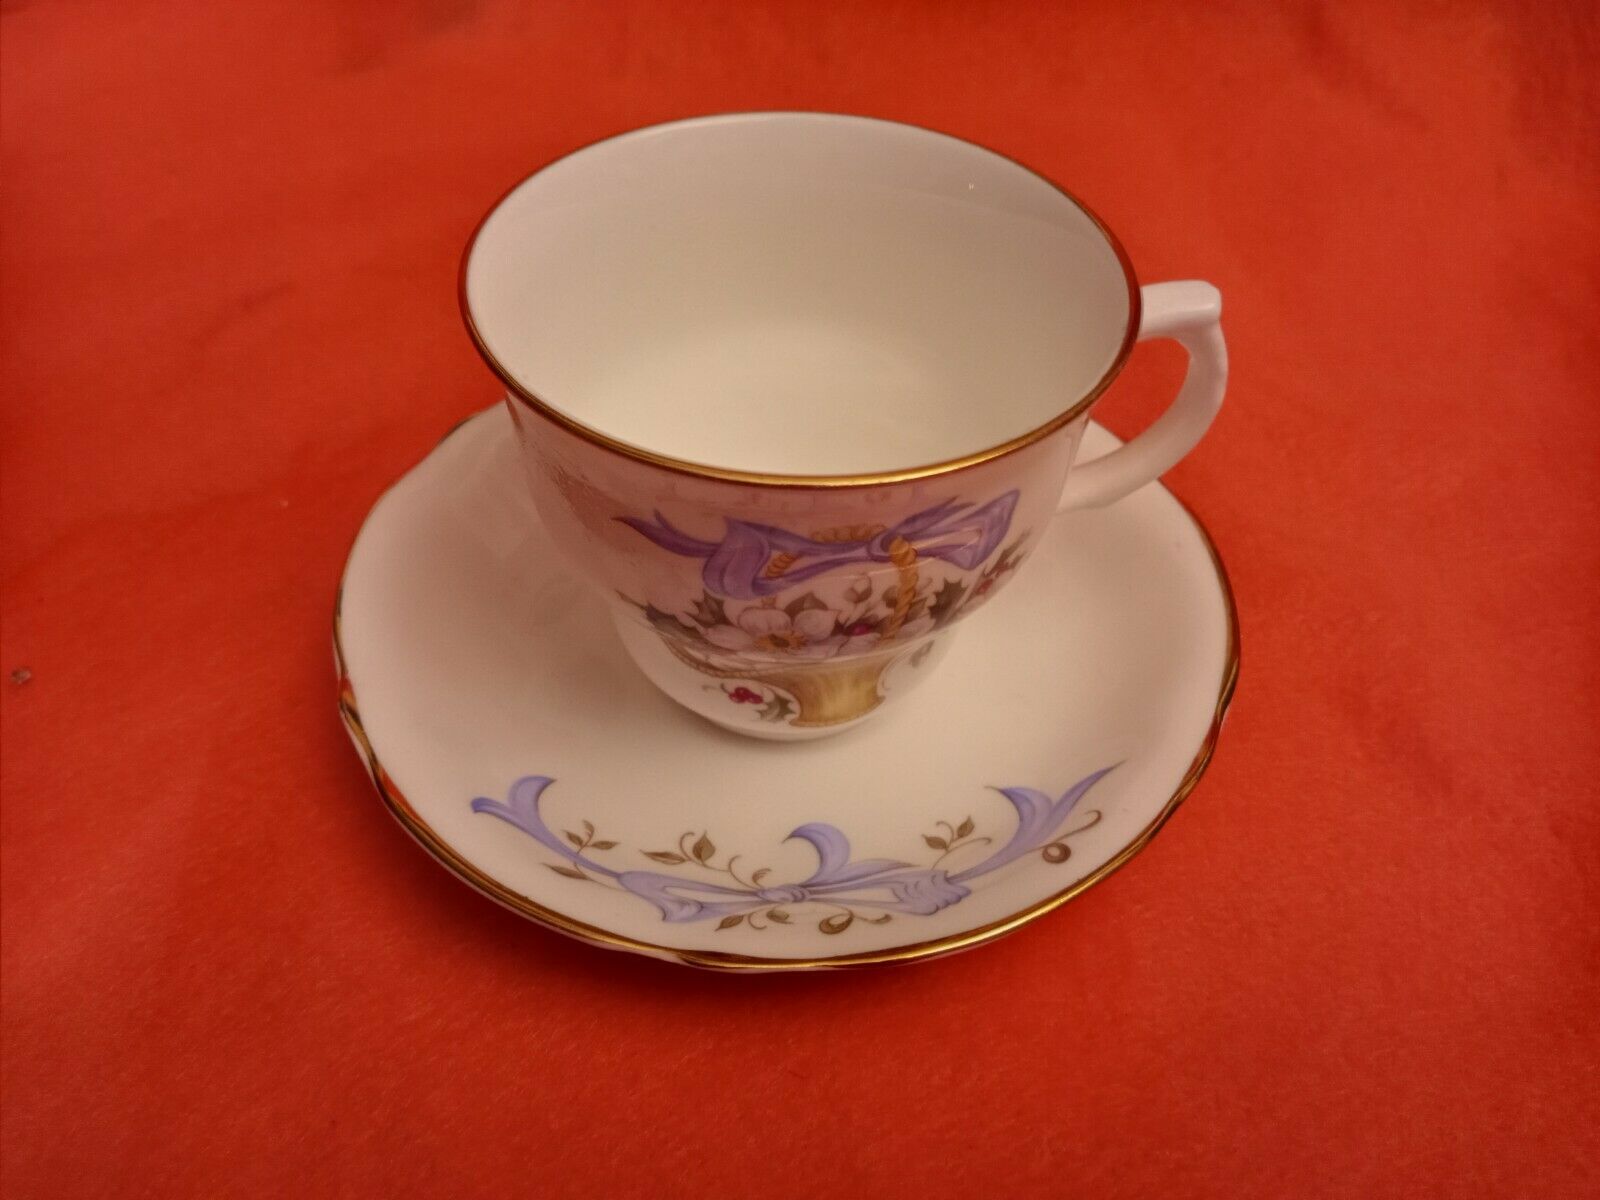 Arklow fine bone china tea cup and saucer made in Ireland